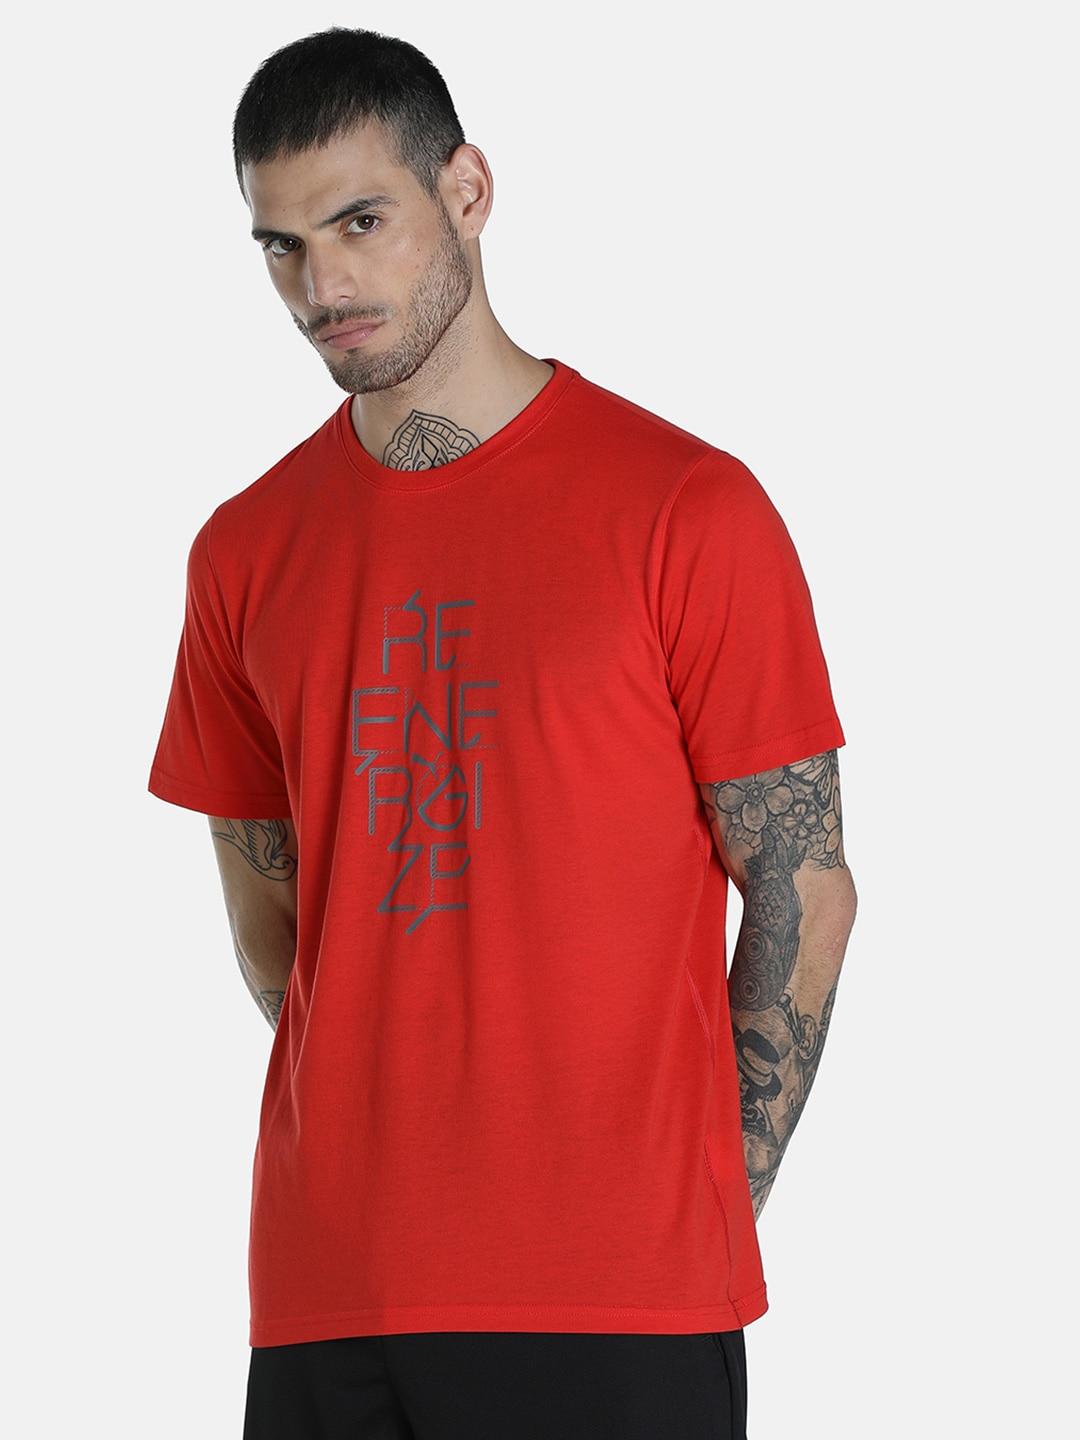 Puma Men Red Typography or Slogan Printed Round Neck Polyester T-shirt